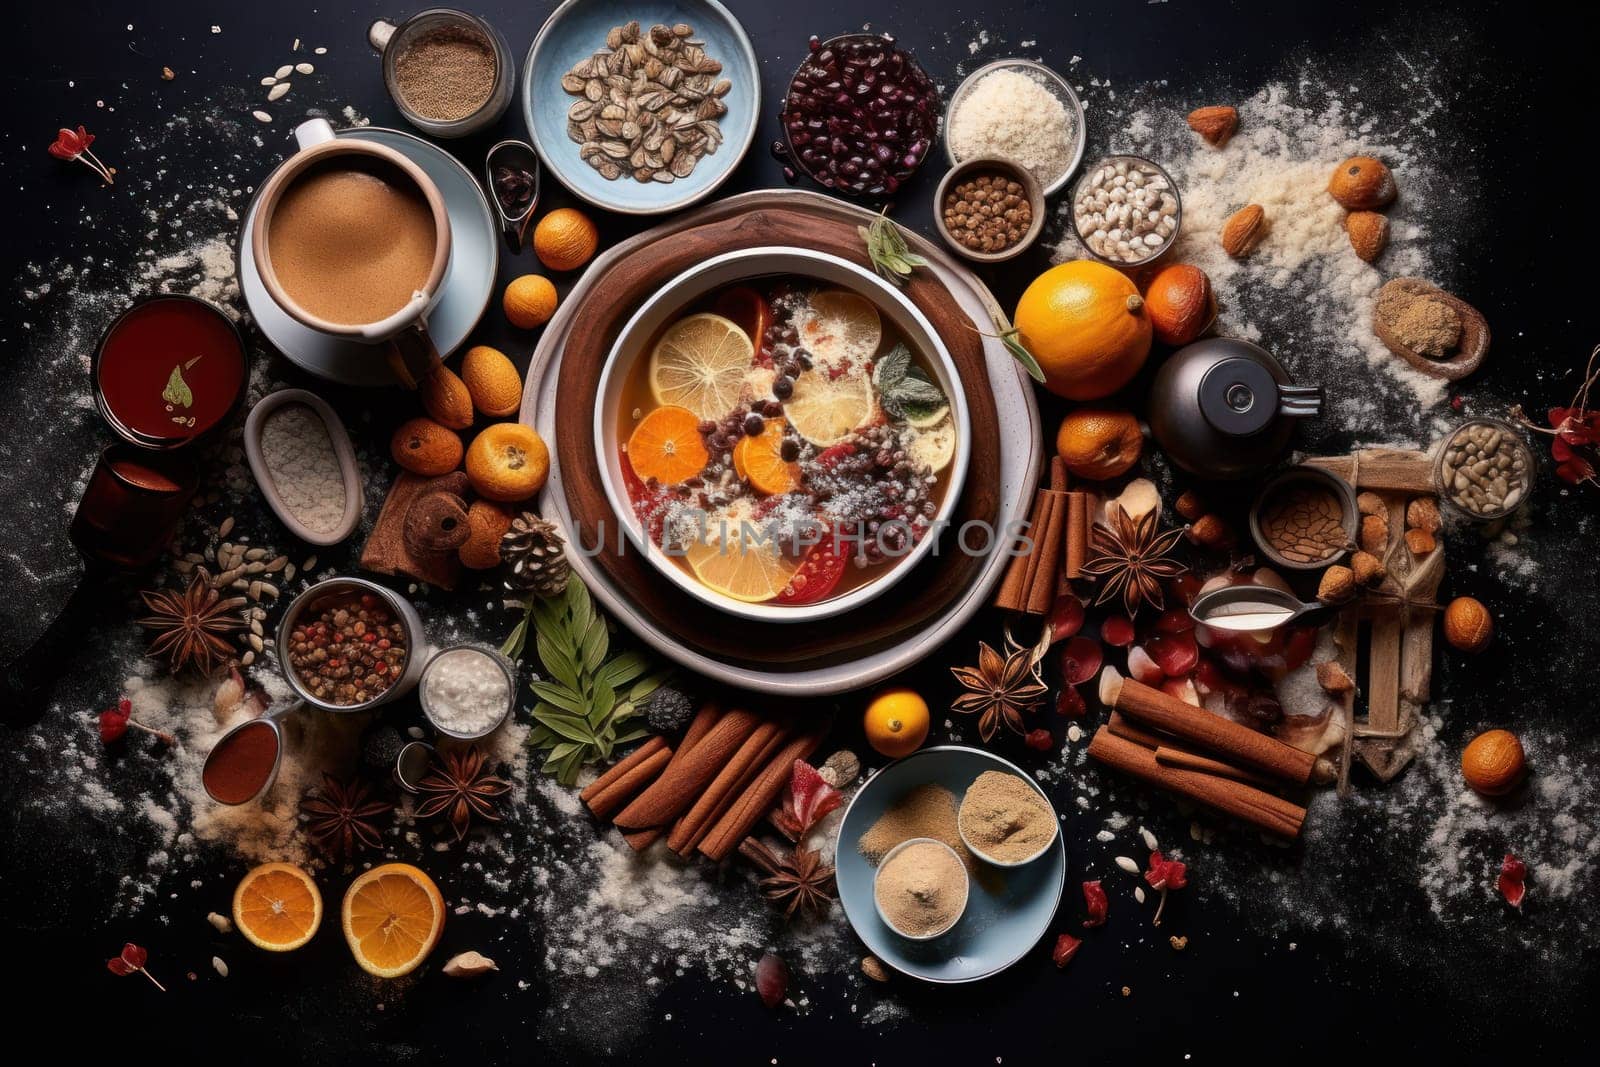 A mouthwatering portrayal of winter's culinary delights, showcasing the artful photography of winter-inspired dishes and beverages like hot soup, roasted chestnuts, and mulled wine.